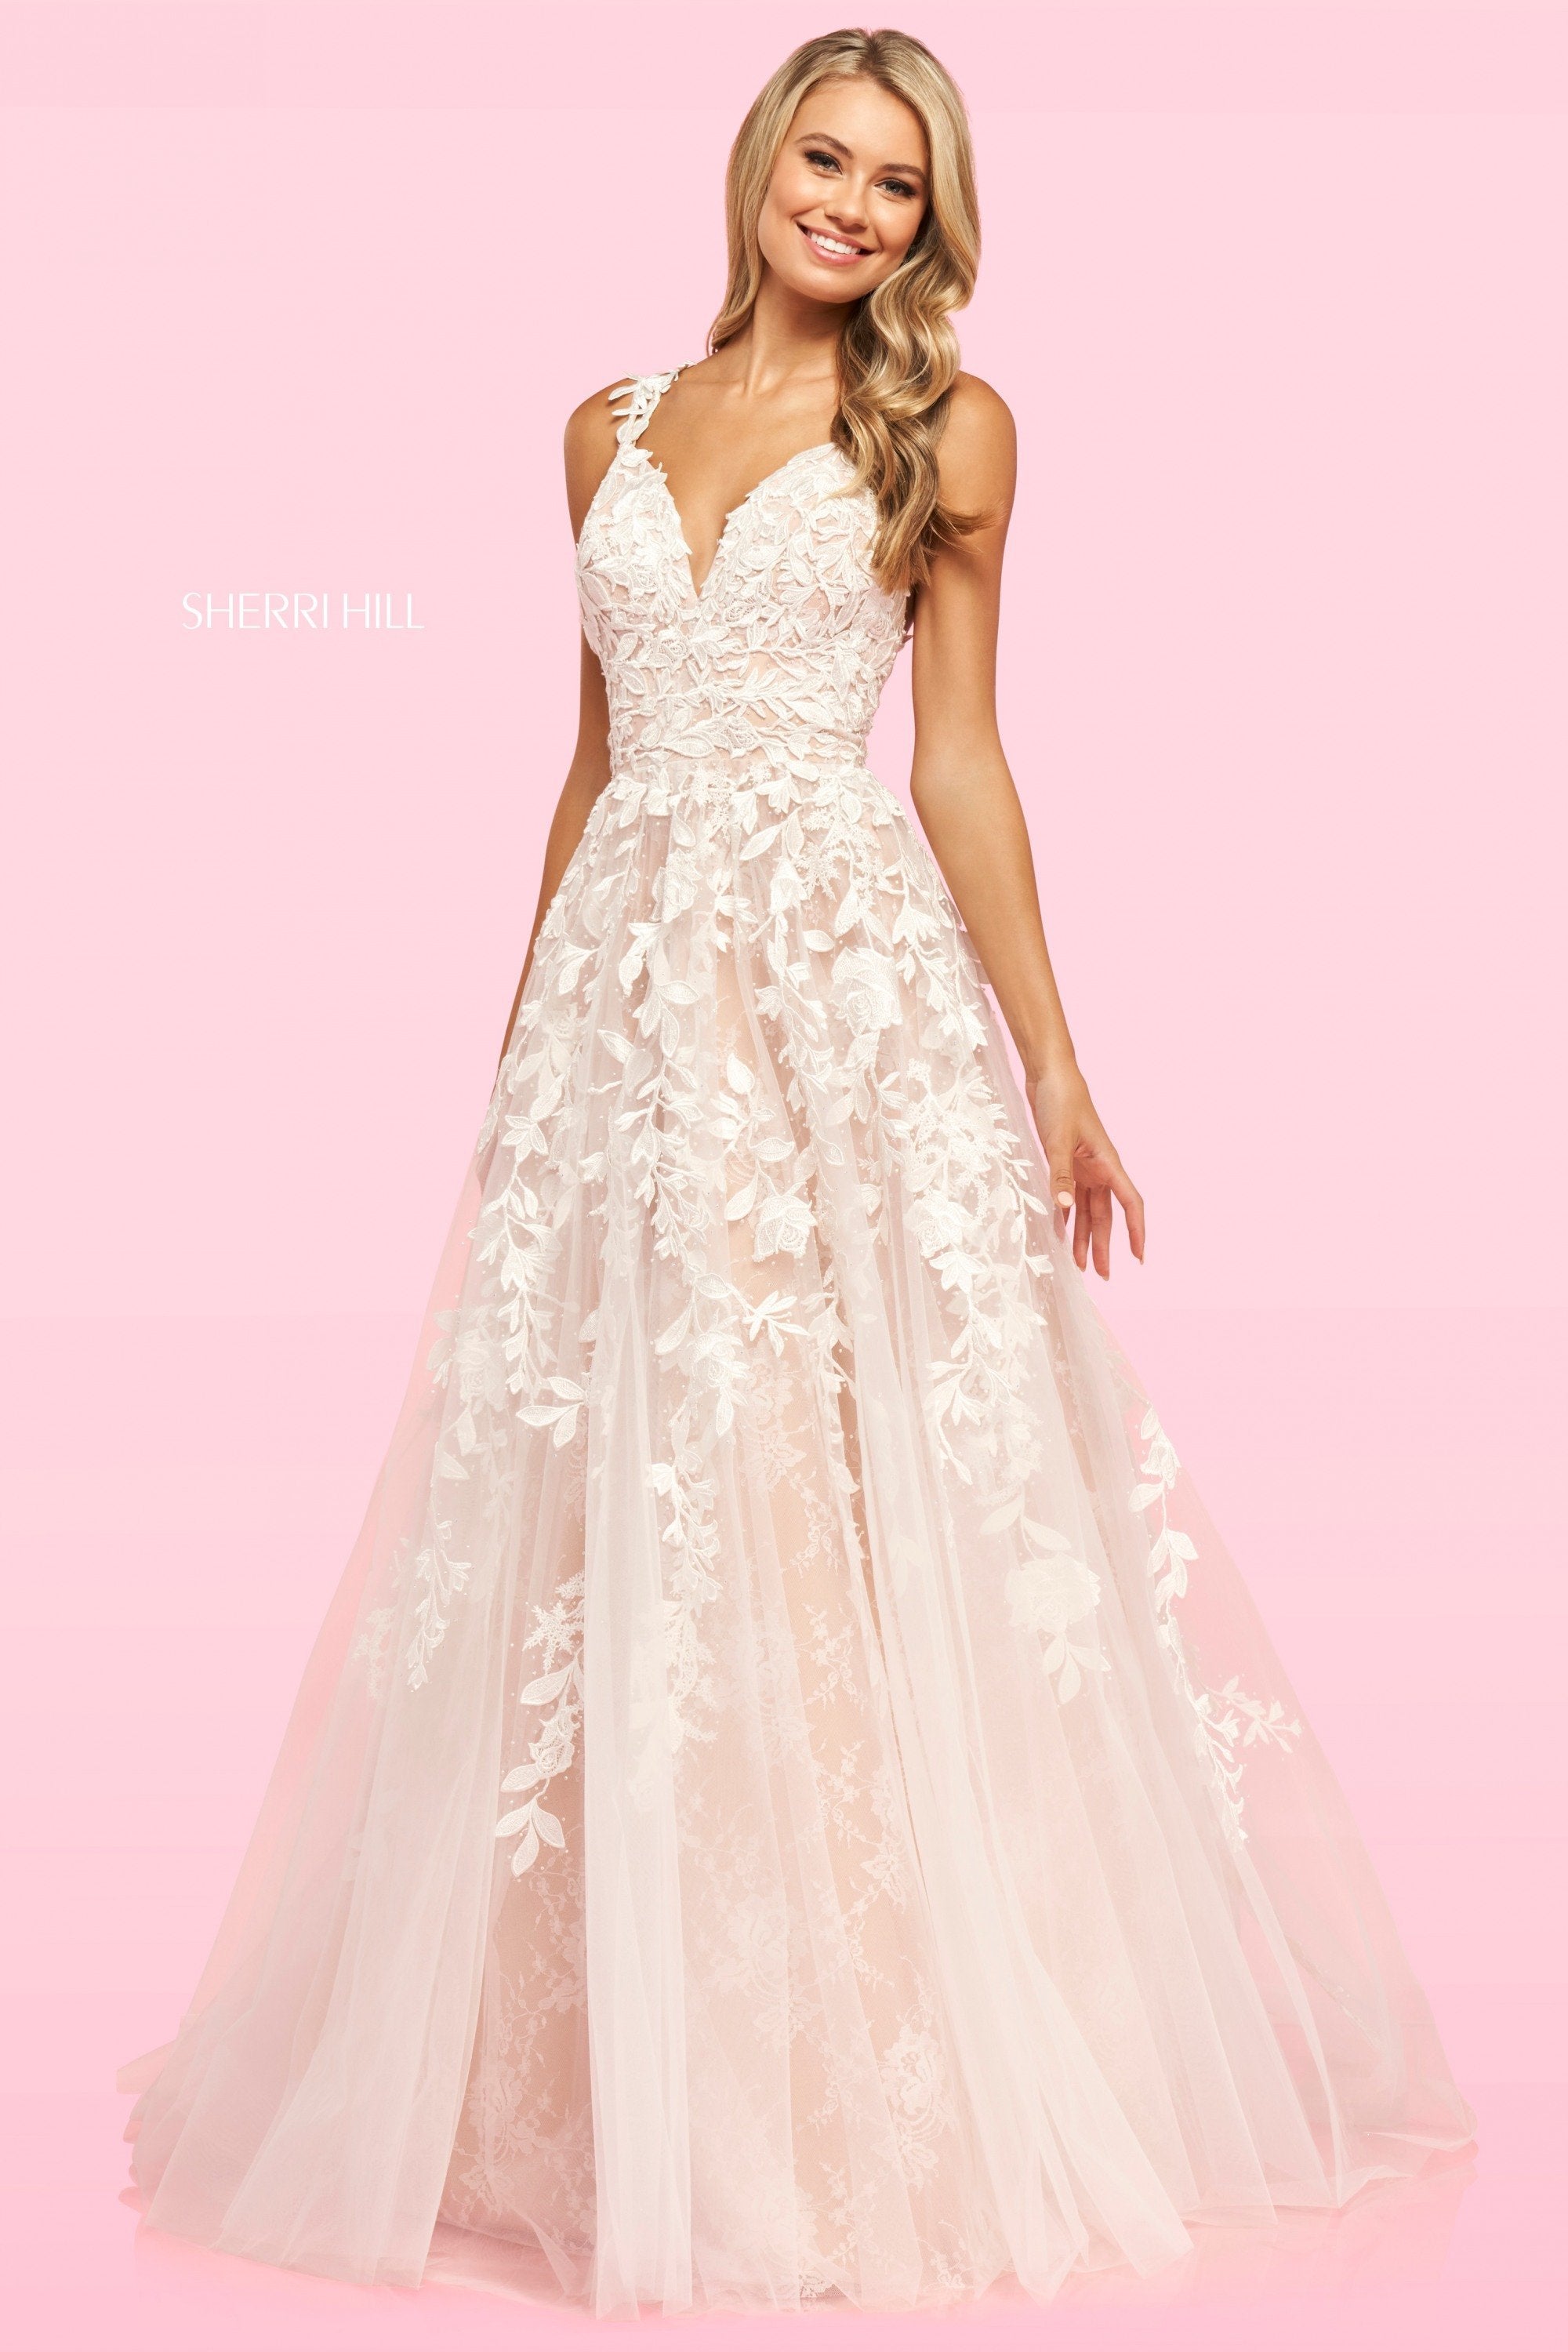 Sherri Hill 54159 dress images in these colors: Lilac, Red, Blush, Ivory, Bright Pink, Periwinkle.